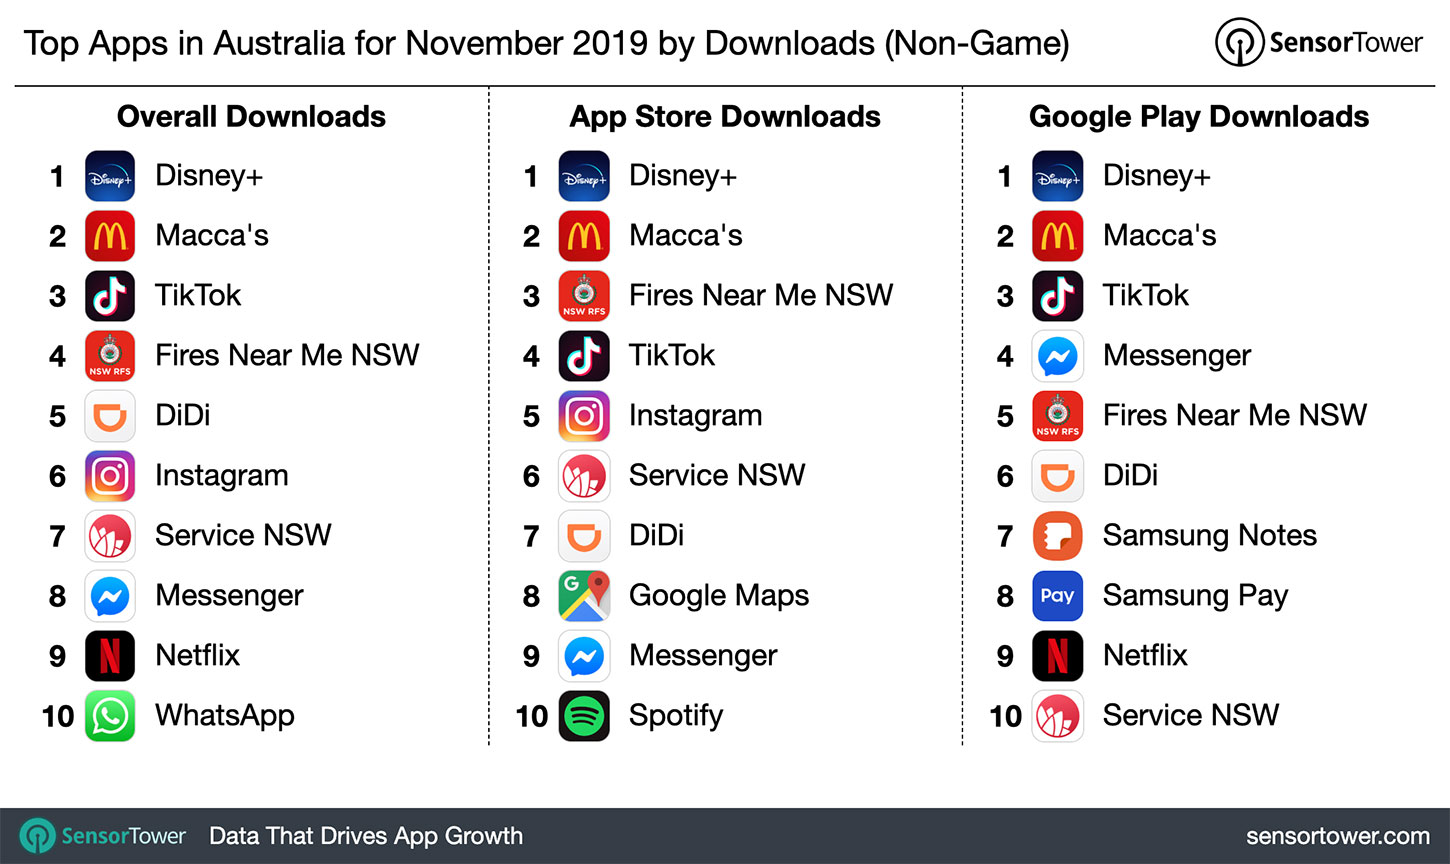 Top Apps in Australia for November 2019 by Downloads